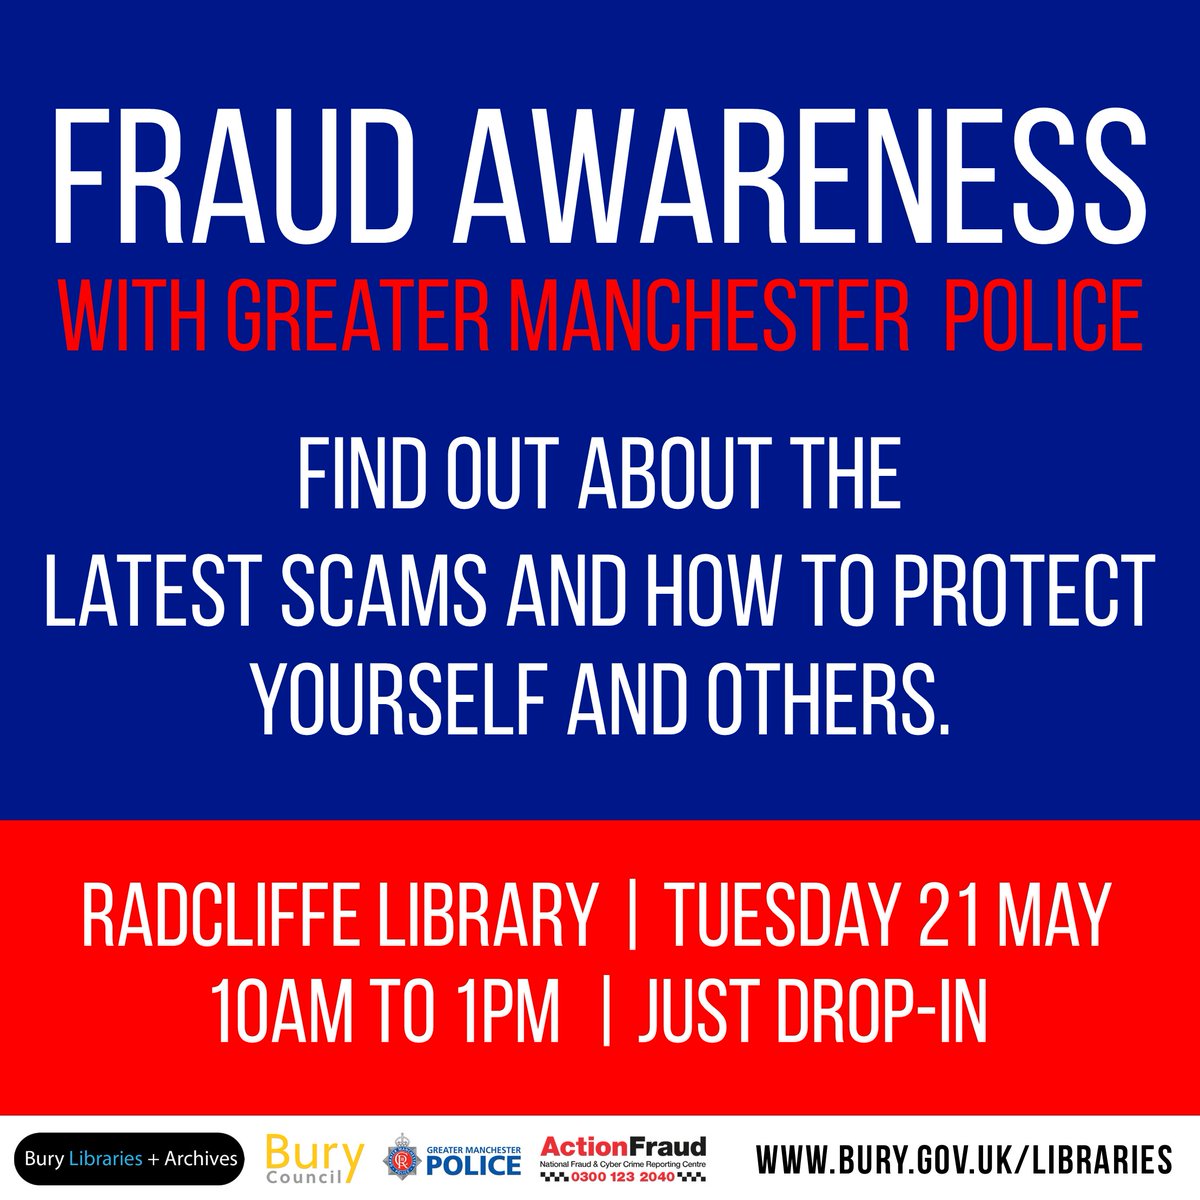 Learn how to protect yourself from fraud and scams at our Fraud Awareness session at #Radcliffe Library on Tuesday 21 May. Drop-in for a chat with @GMPolice between 10am and 1pm to find out about a wide range of scams and how to avoid them. @GMPFraud @ActionFraudUK #Bury